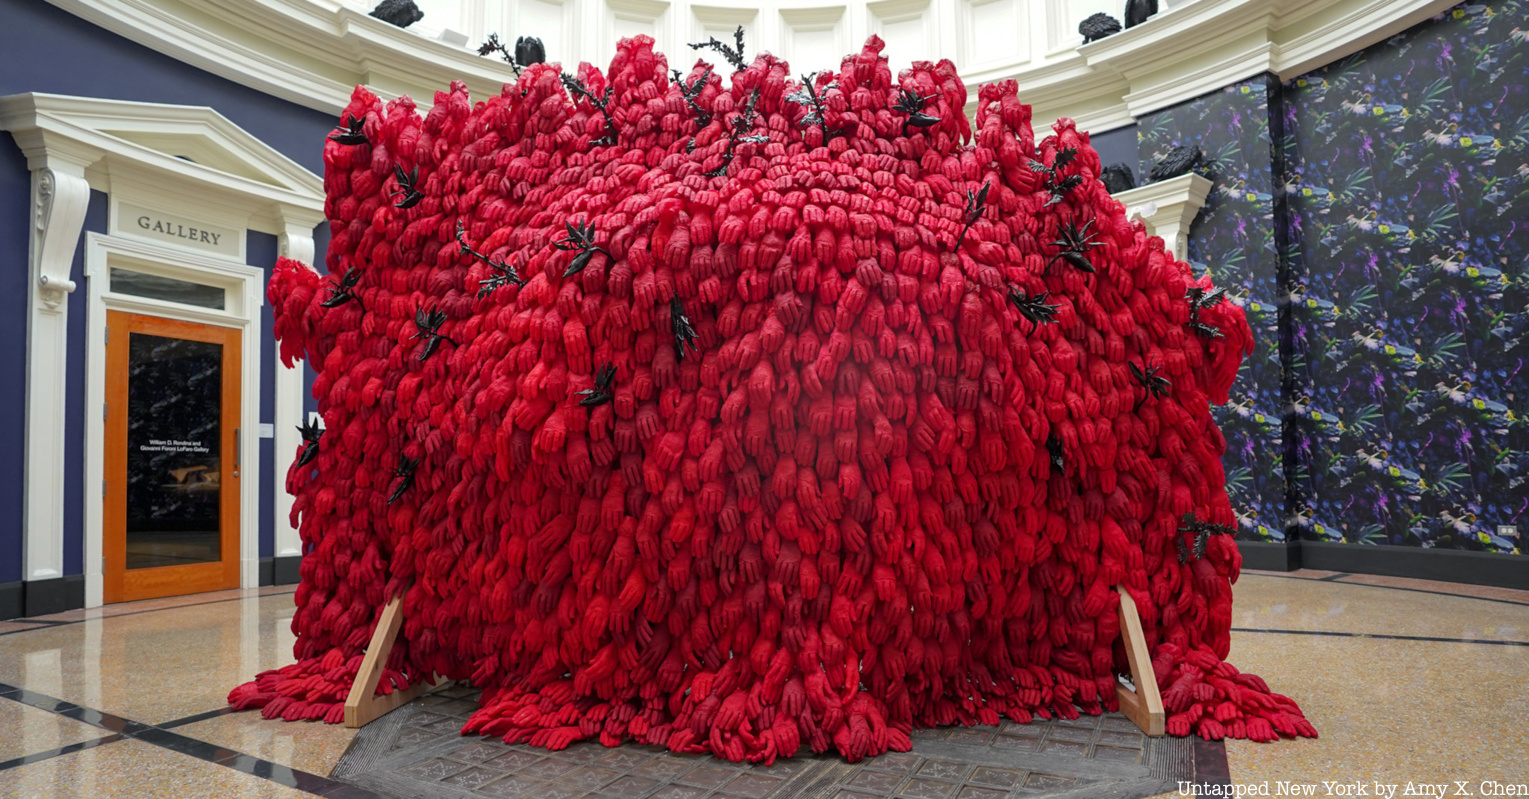 A sculpture at the New York Botanical Garden summer exhibit made of red gloves